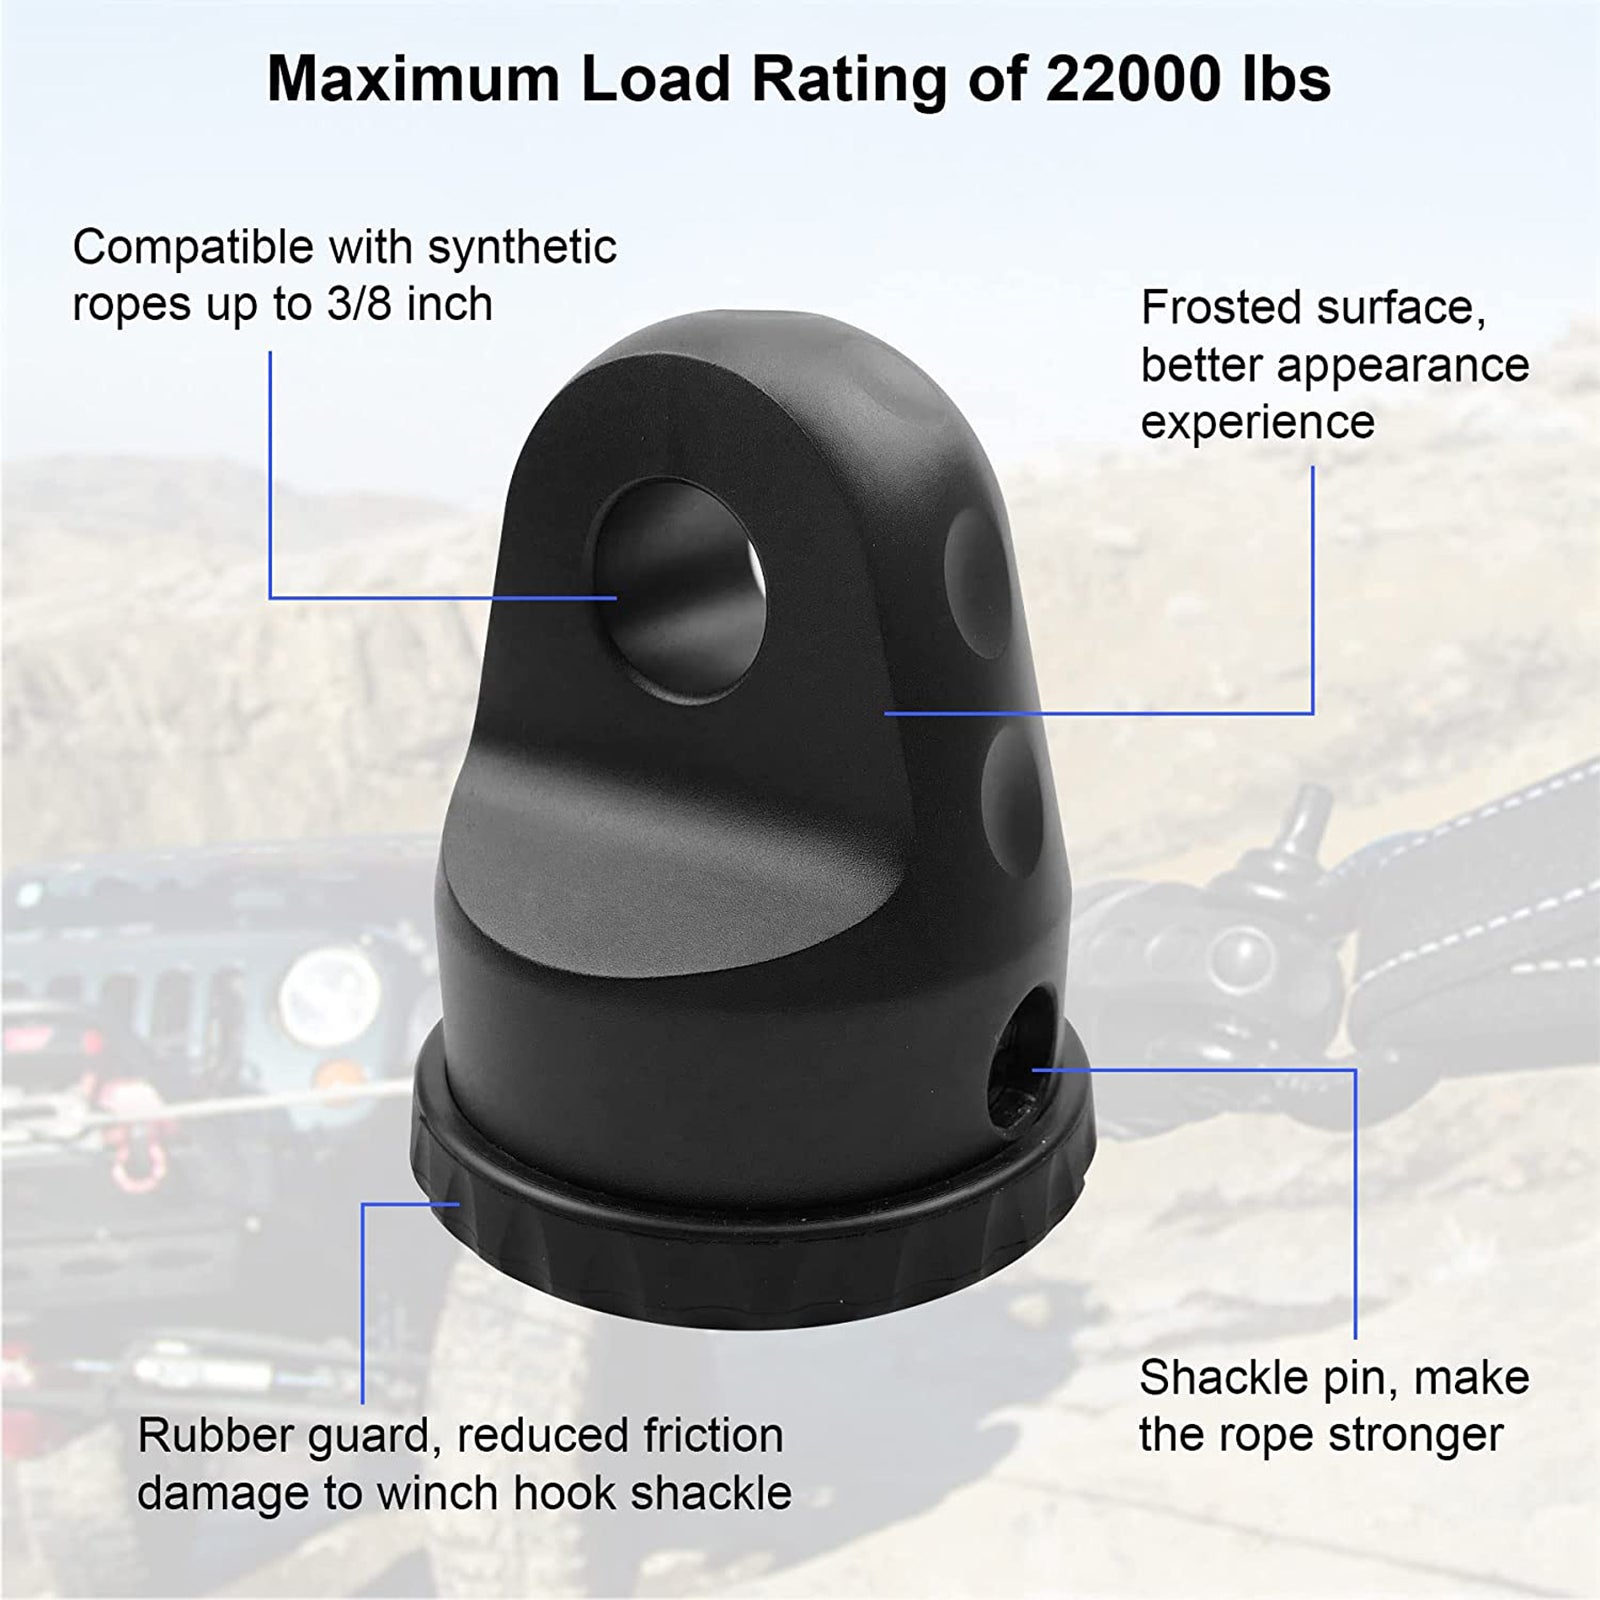 OPENROAD Winch Hook Shackle 3/4" D-Ring 22000 lbs Load Rating  openroad4wd.com   